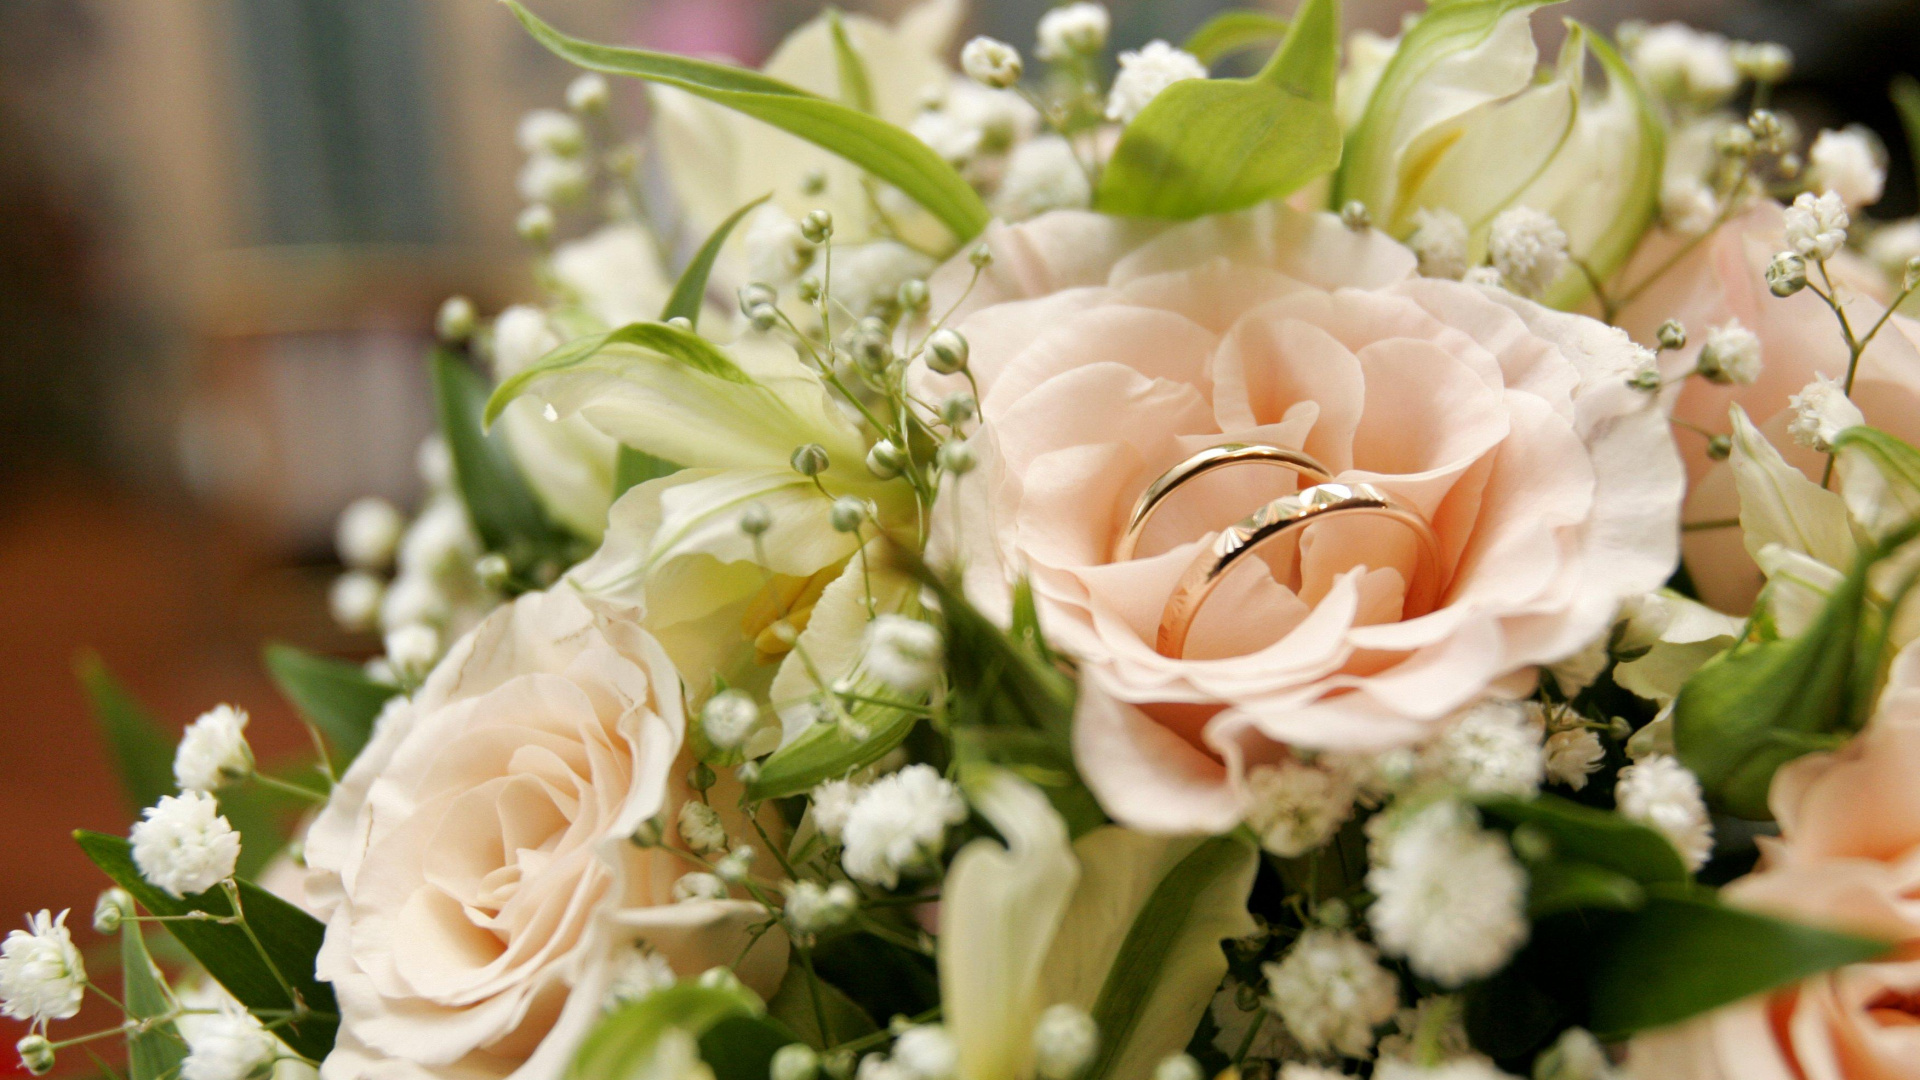 White Roses Bouquet in Close up Photography. Wallpaper in 1920x1080 Resolution